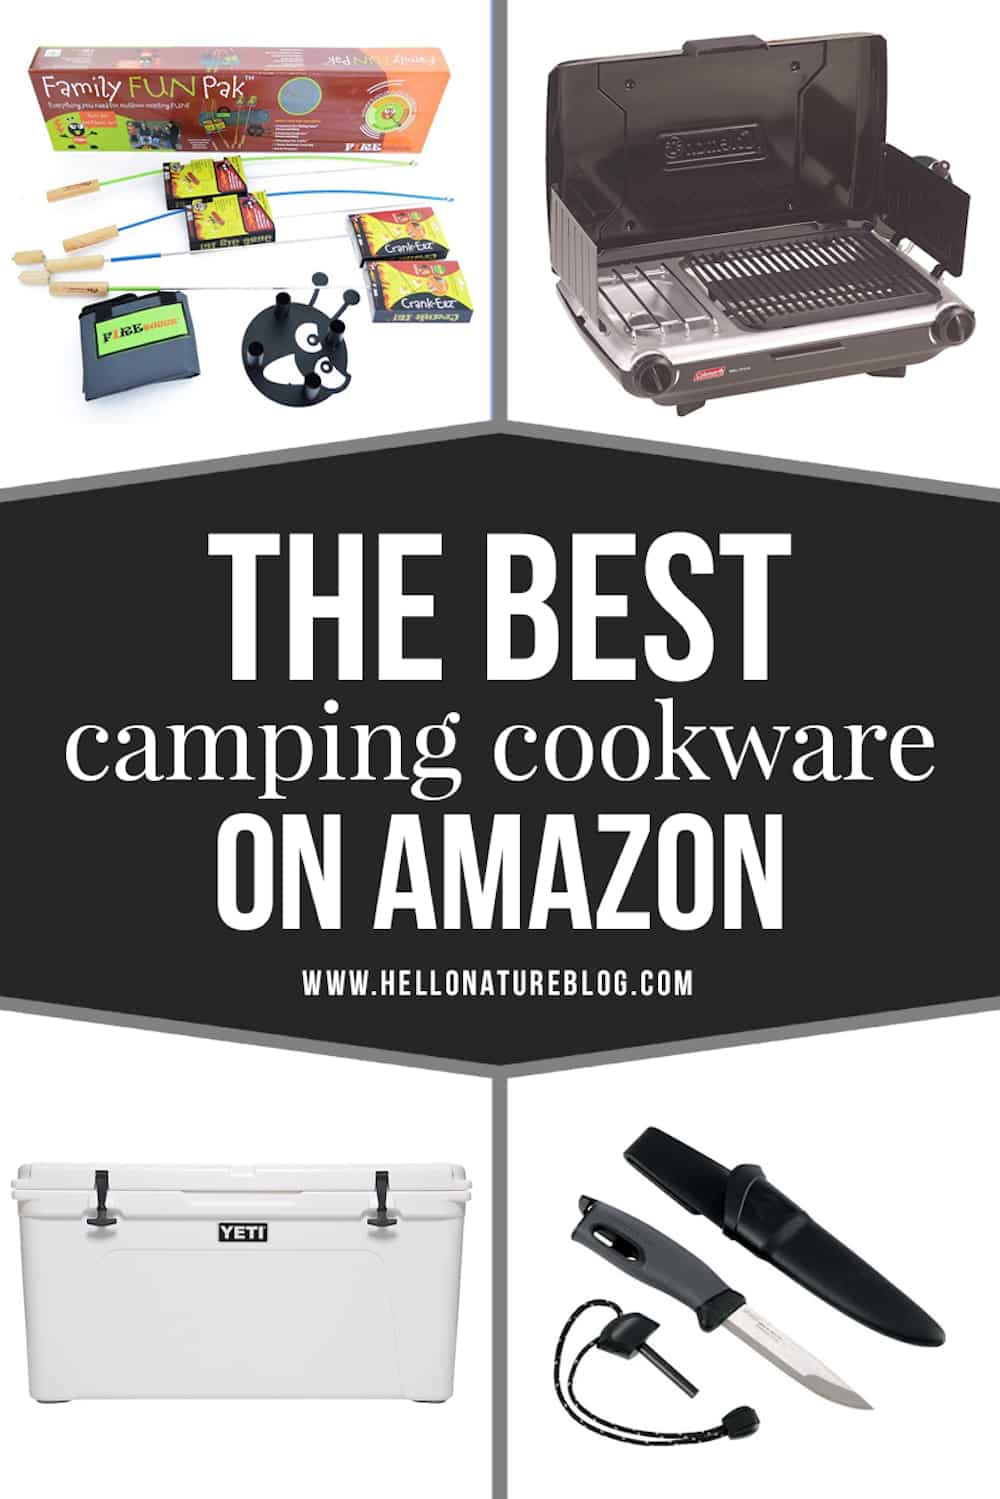 Lifestyle and Travel Blogger Ashley from Hello Nature is sharing the best camping cookware on Amazon. You'll have some awesome easy camping food on your next family camping trip.